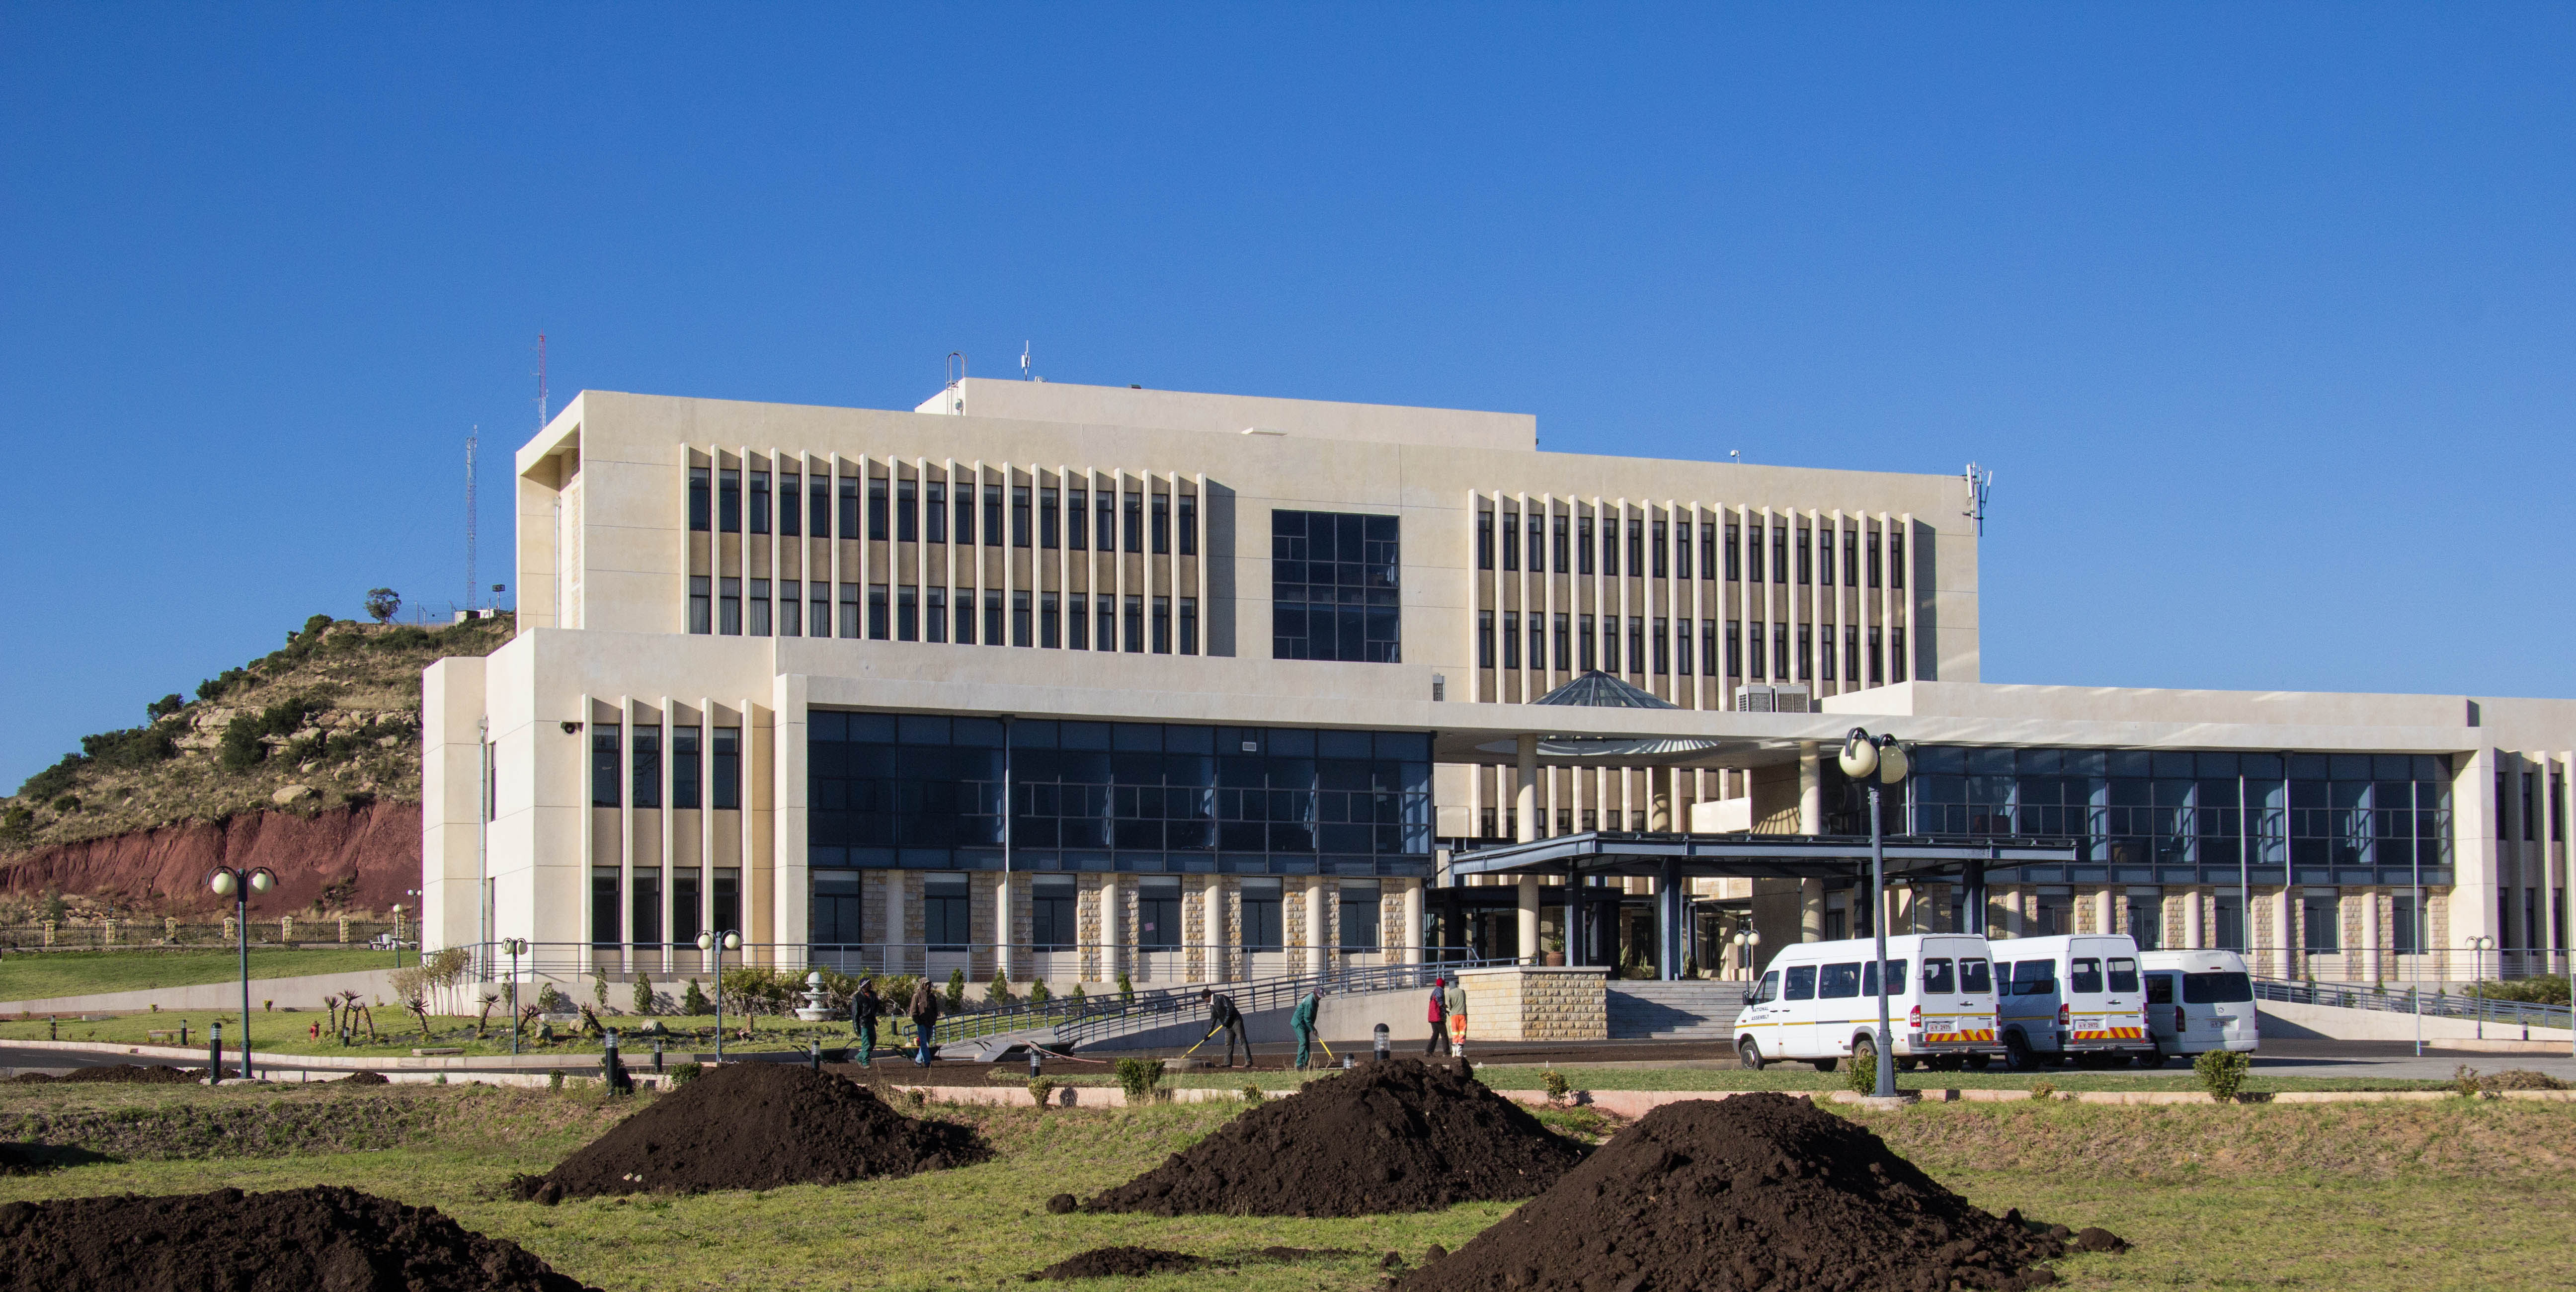 Parliament of Lesotho, AER Africa, https://creativecommons.org/licenses/by/2.0/legalcode